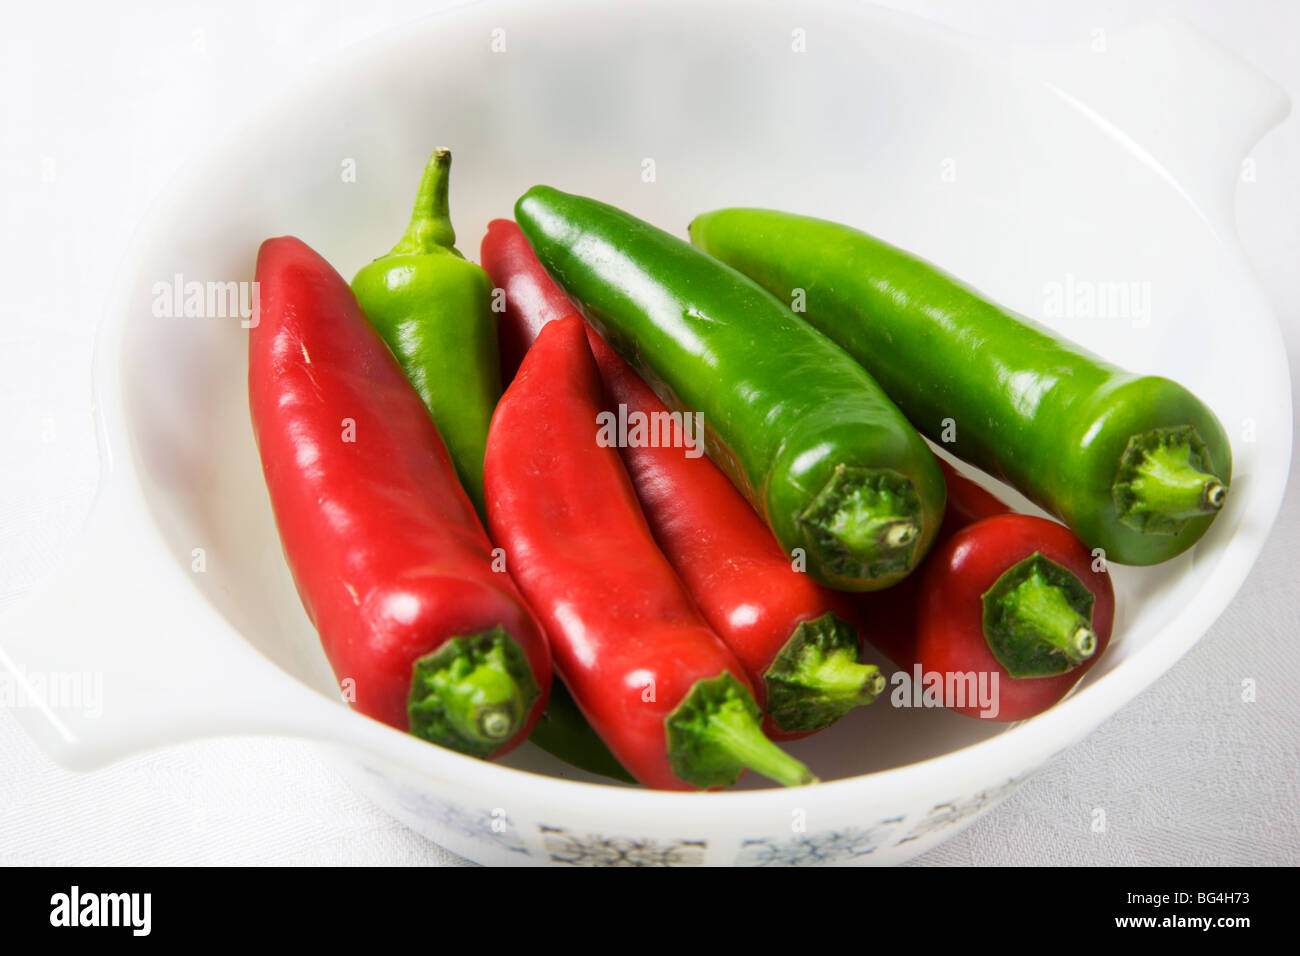 Red and Green Chili Peppers in a White Dish Stock Photo